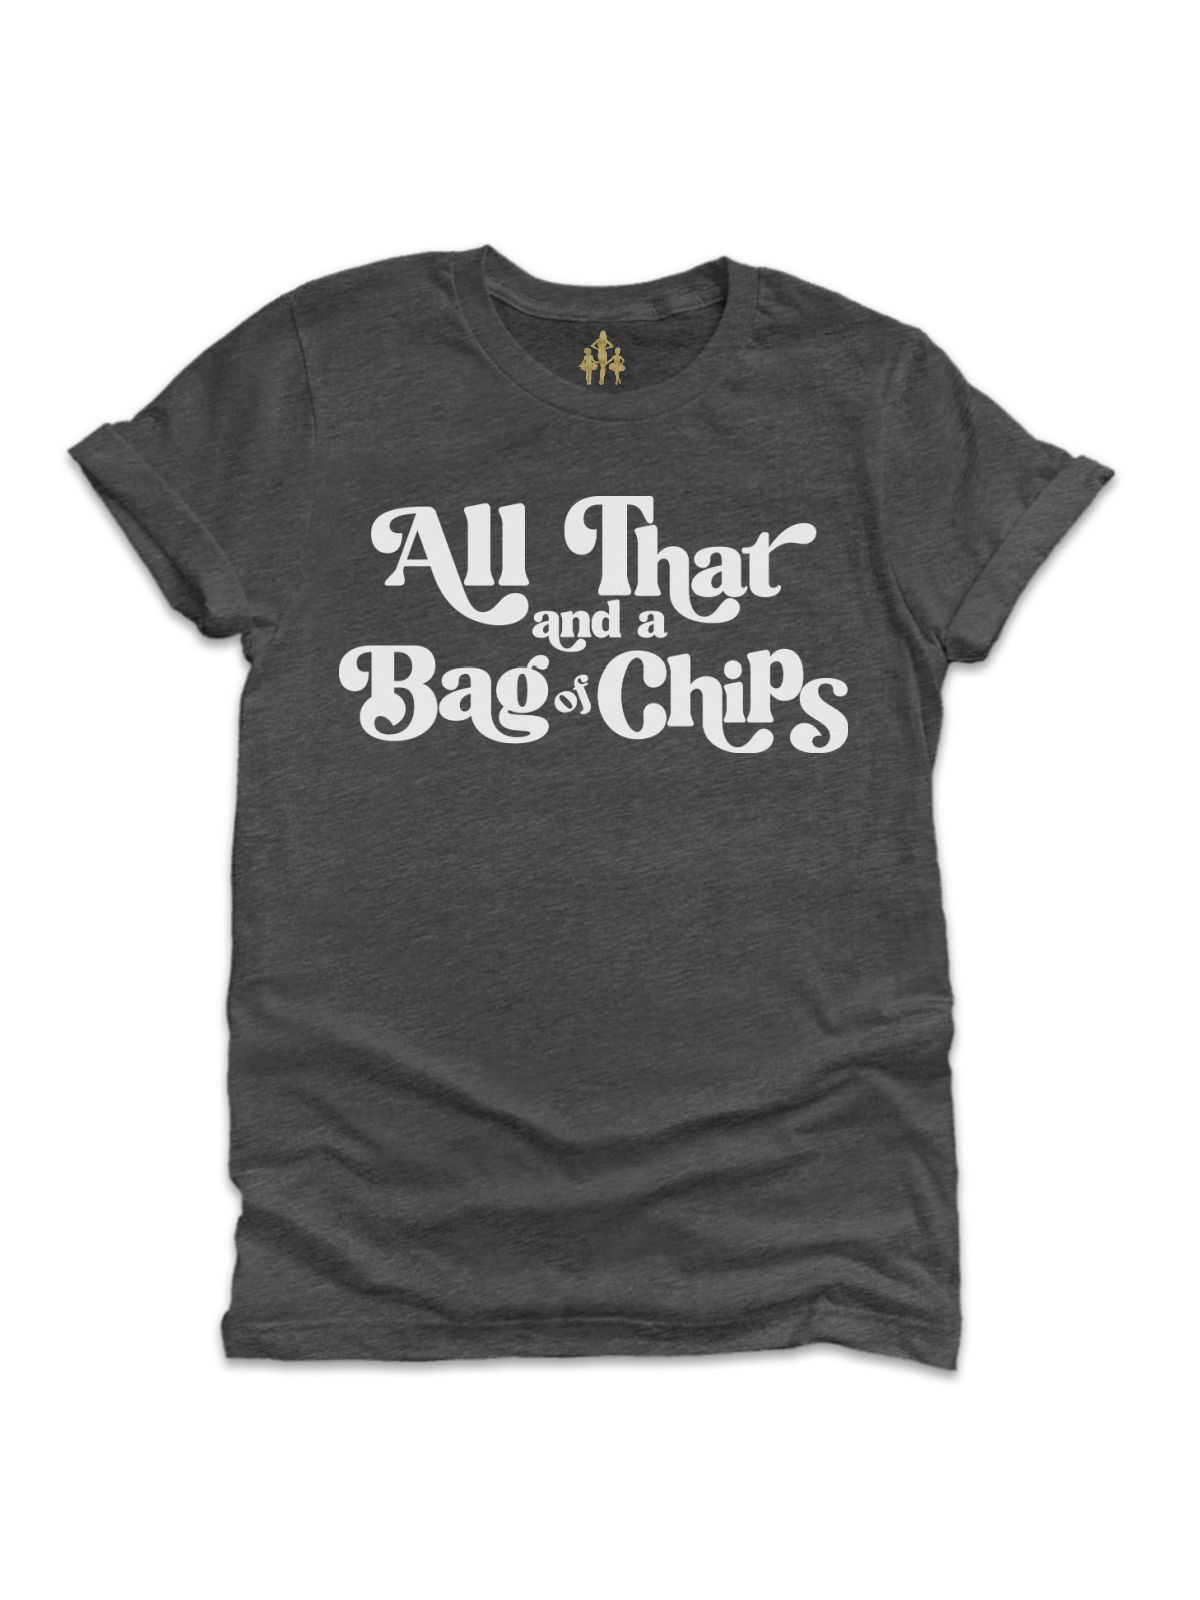 All That and a Bag of Chips Women's Dark Gray 90s Shirt